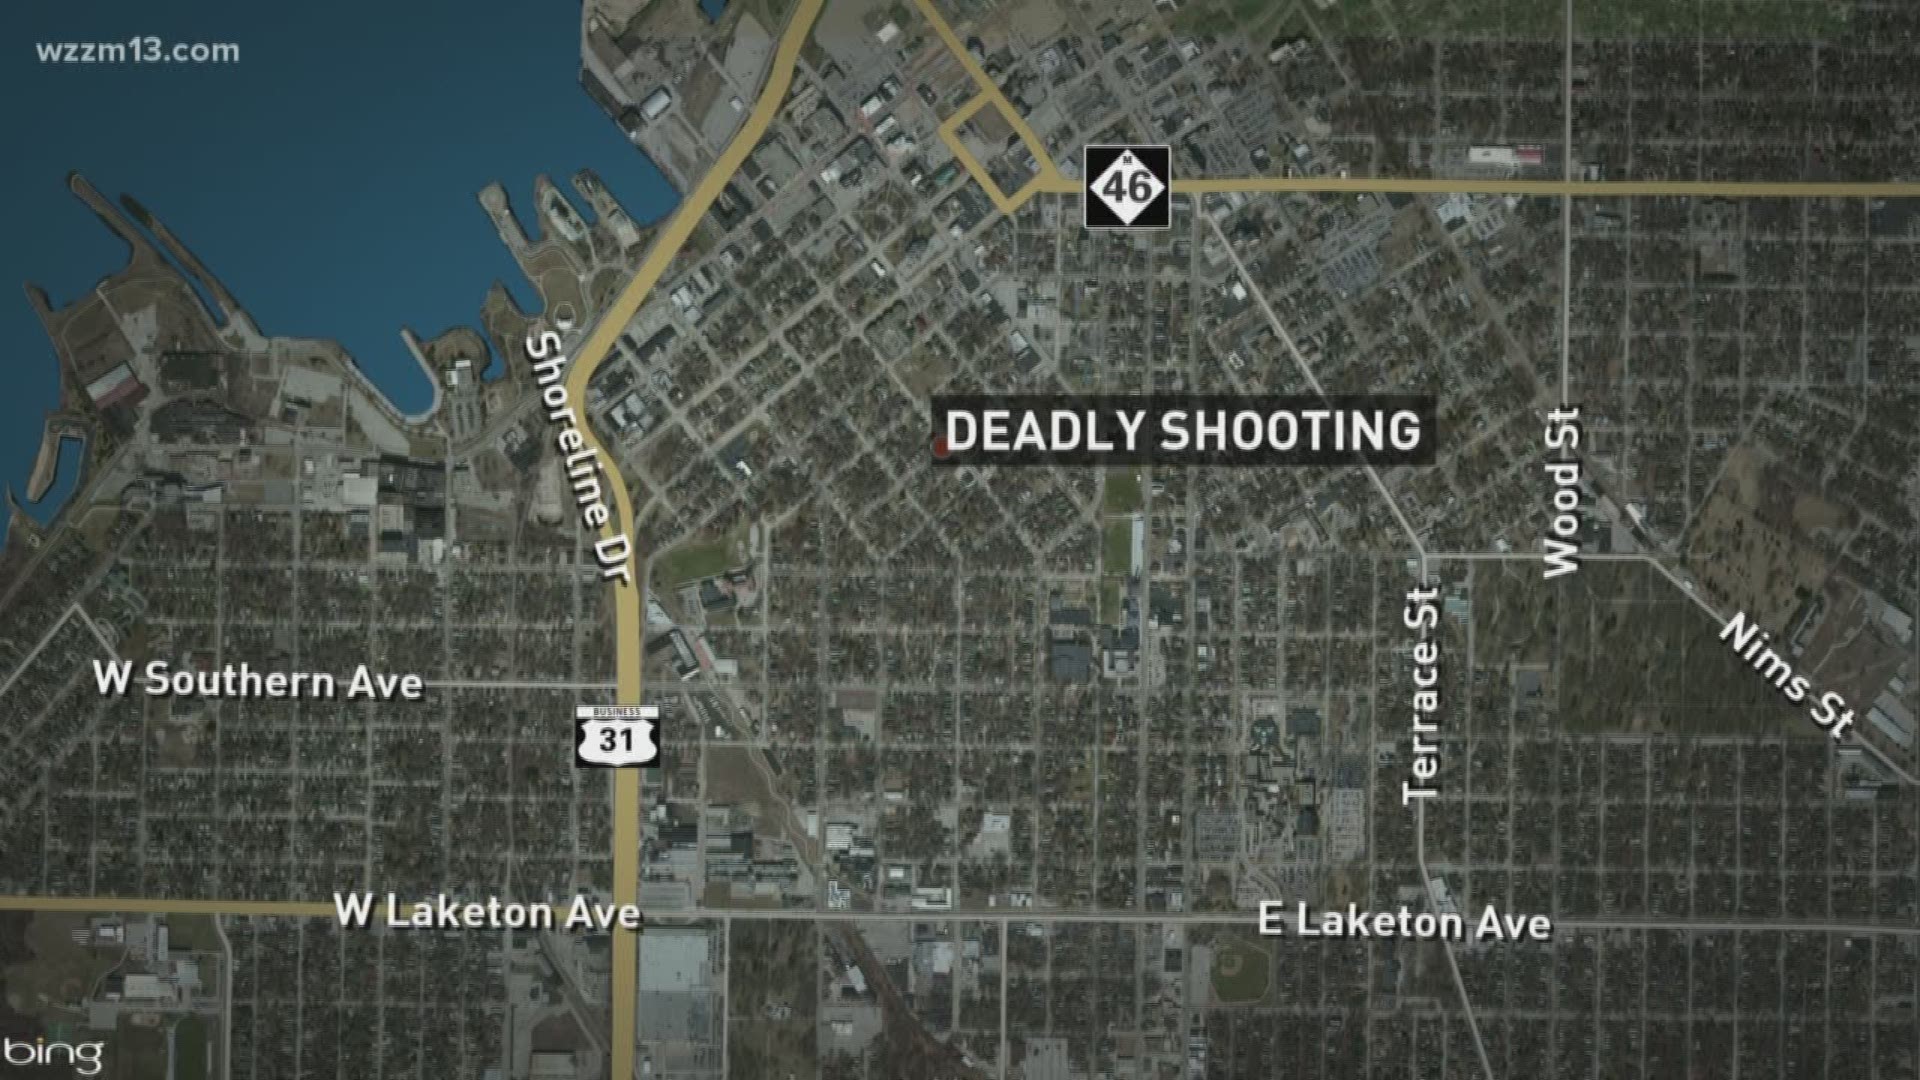 Police investigating deadly shooting in Muskegon, thought domestic